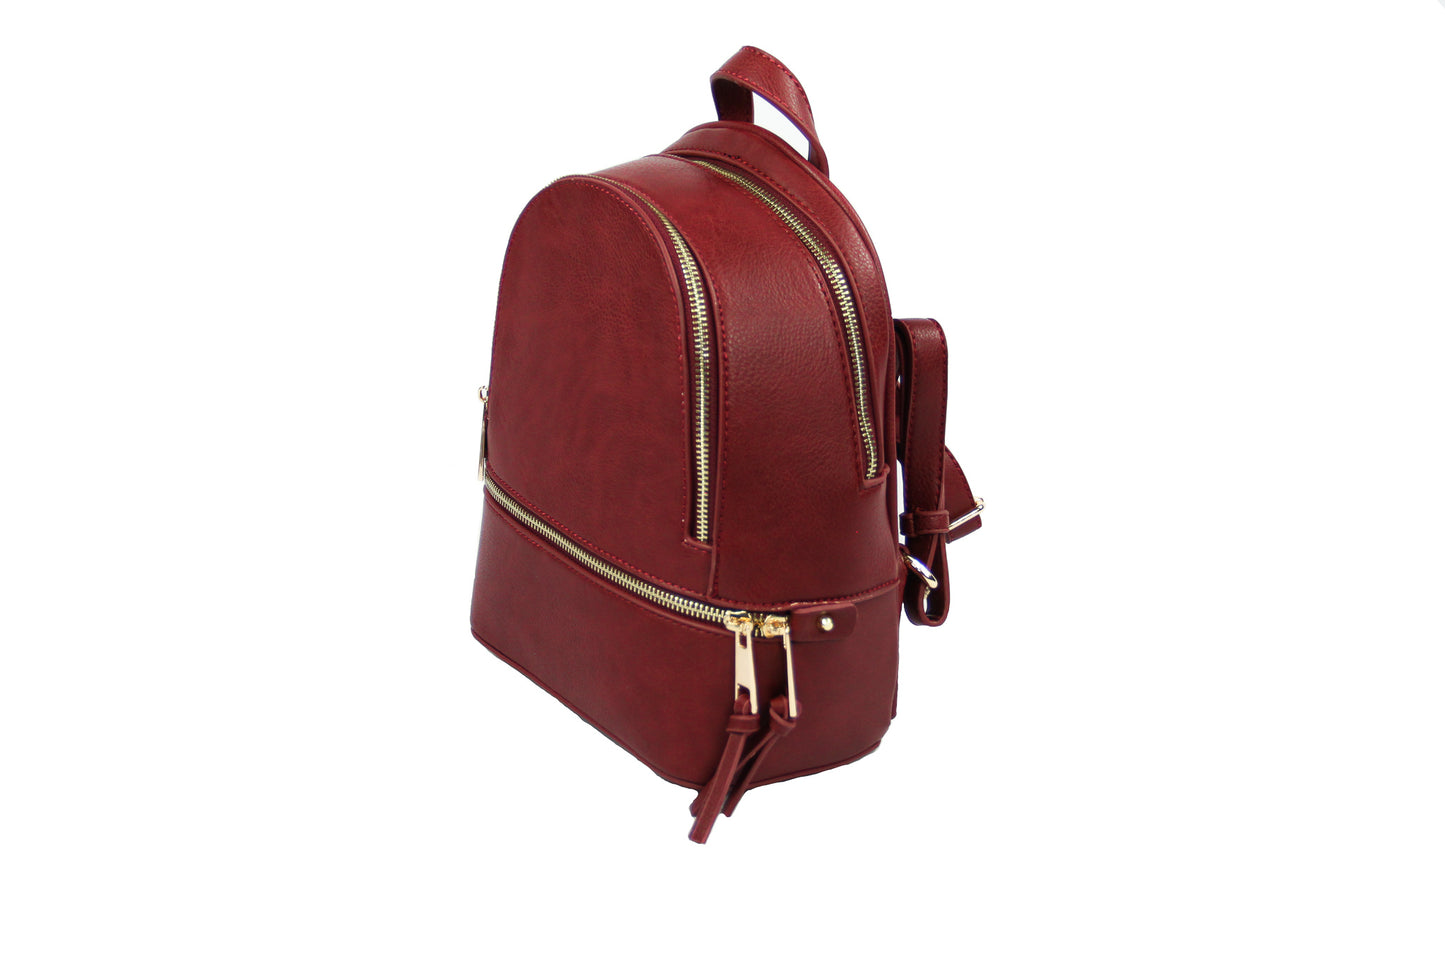 Burgundy Backpack Purse for School, Travel, and Shopping. Made with Adjustable Straps and Multiple Zippers and Pockets for Storage. PU Leather & Polyester Lining. Gold Detail. 